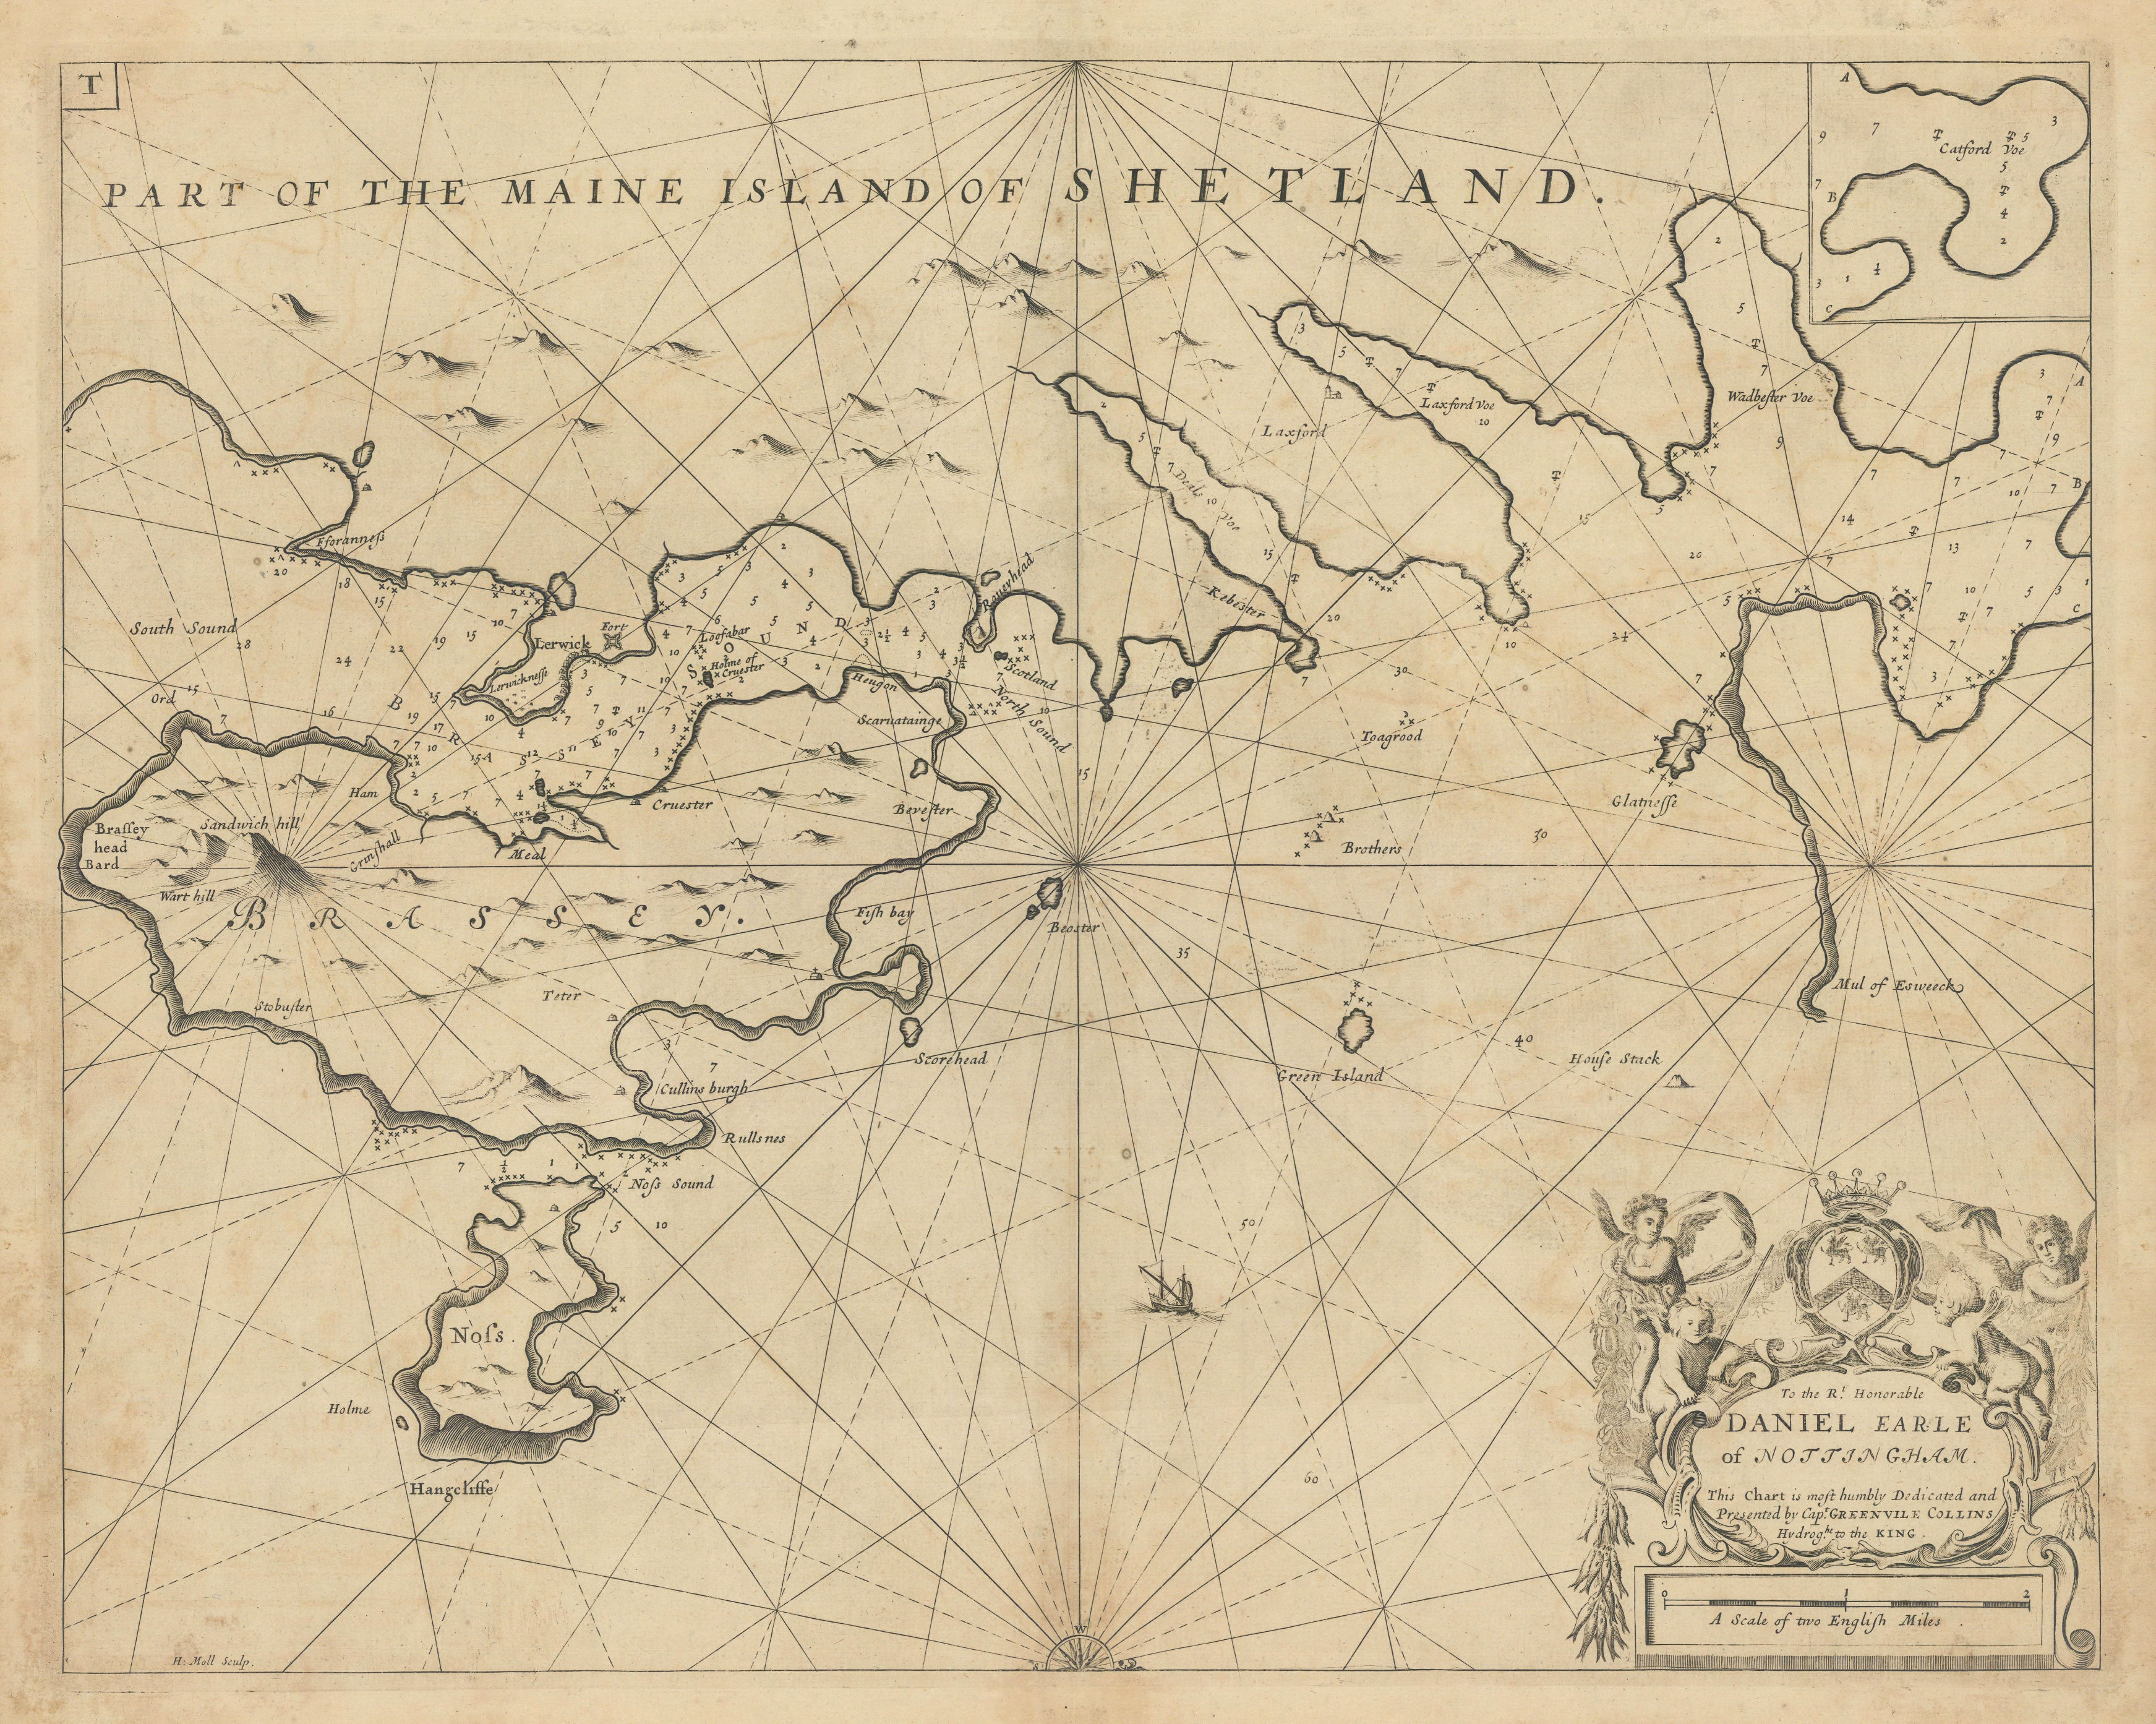 Associate Product Part of the Maine Island of Shetland sea chart. Lerwick Bressay COLLINS 1723 map